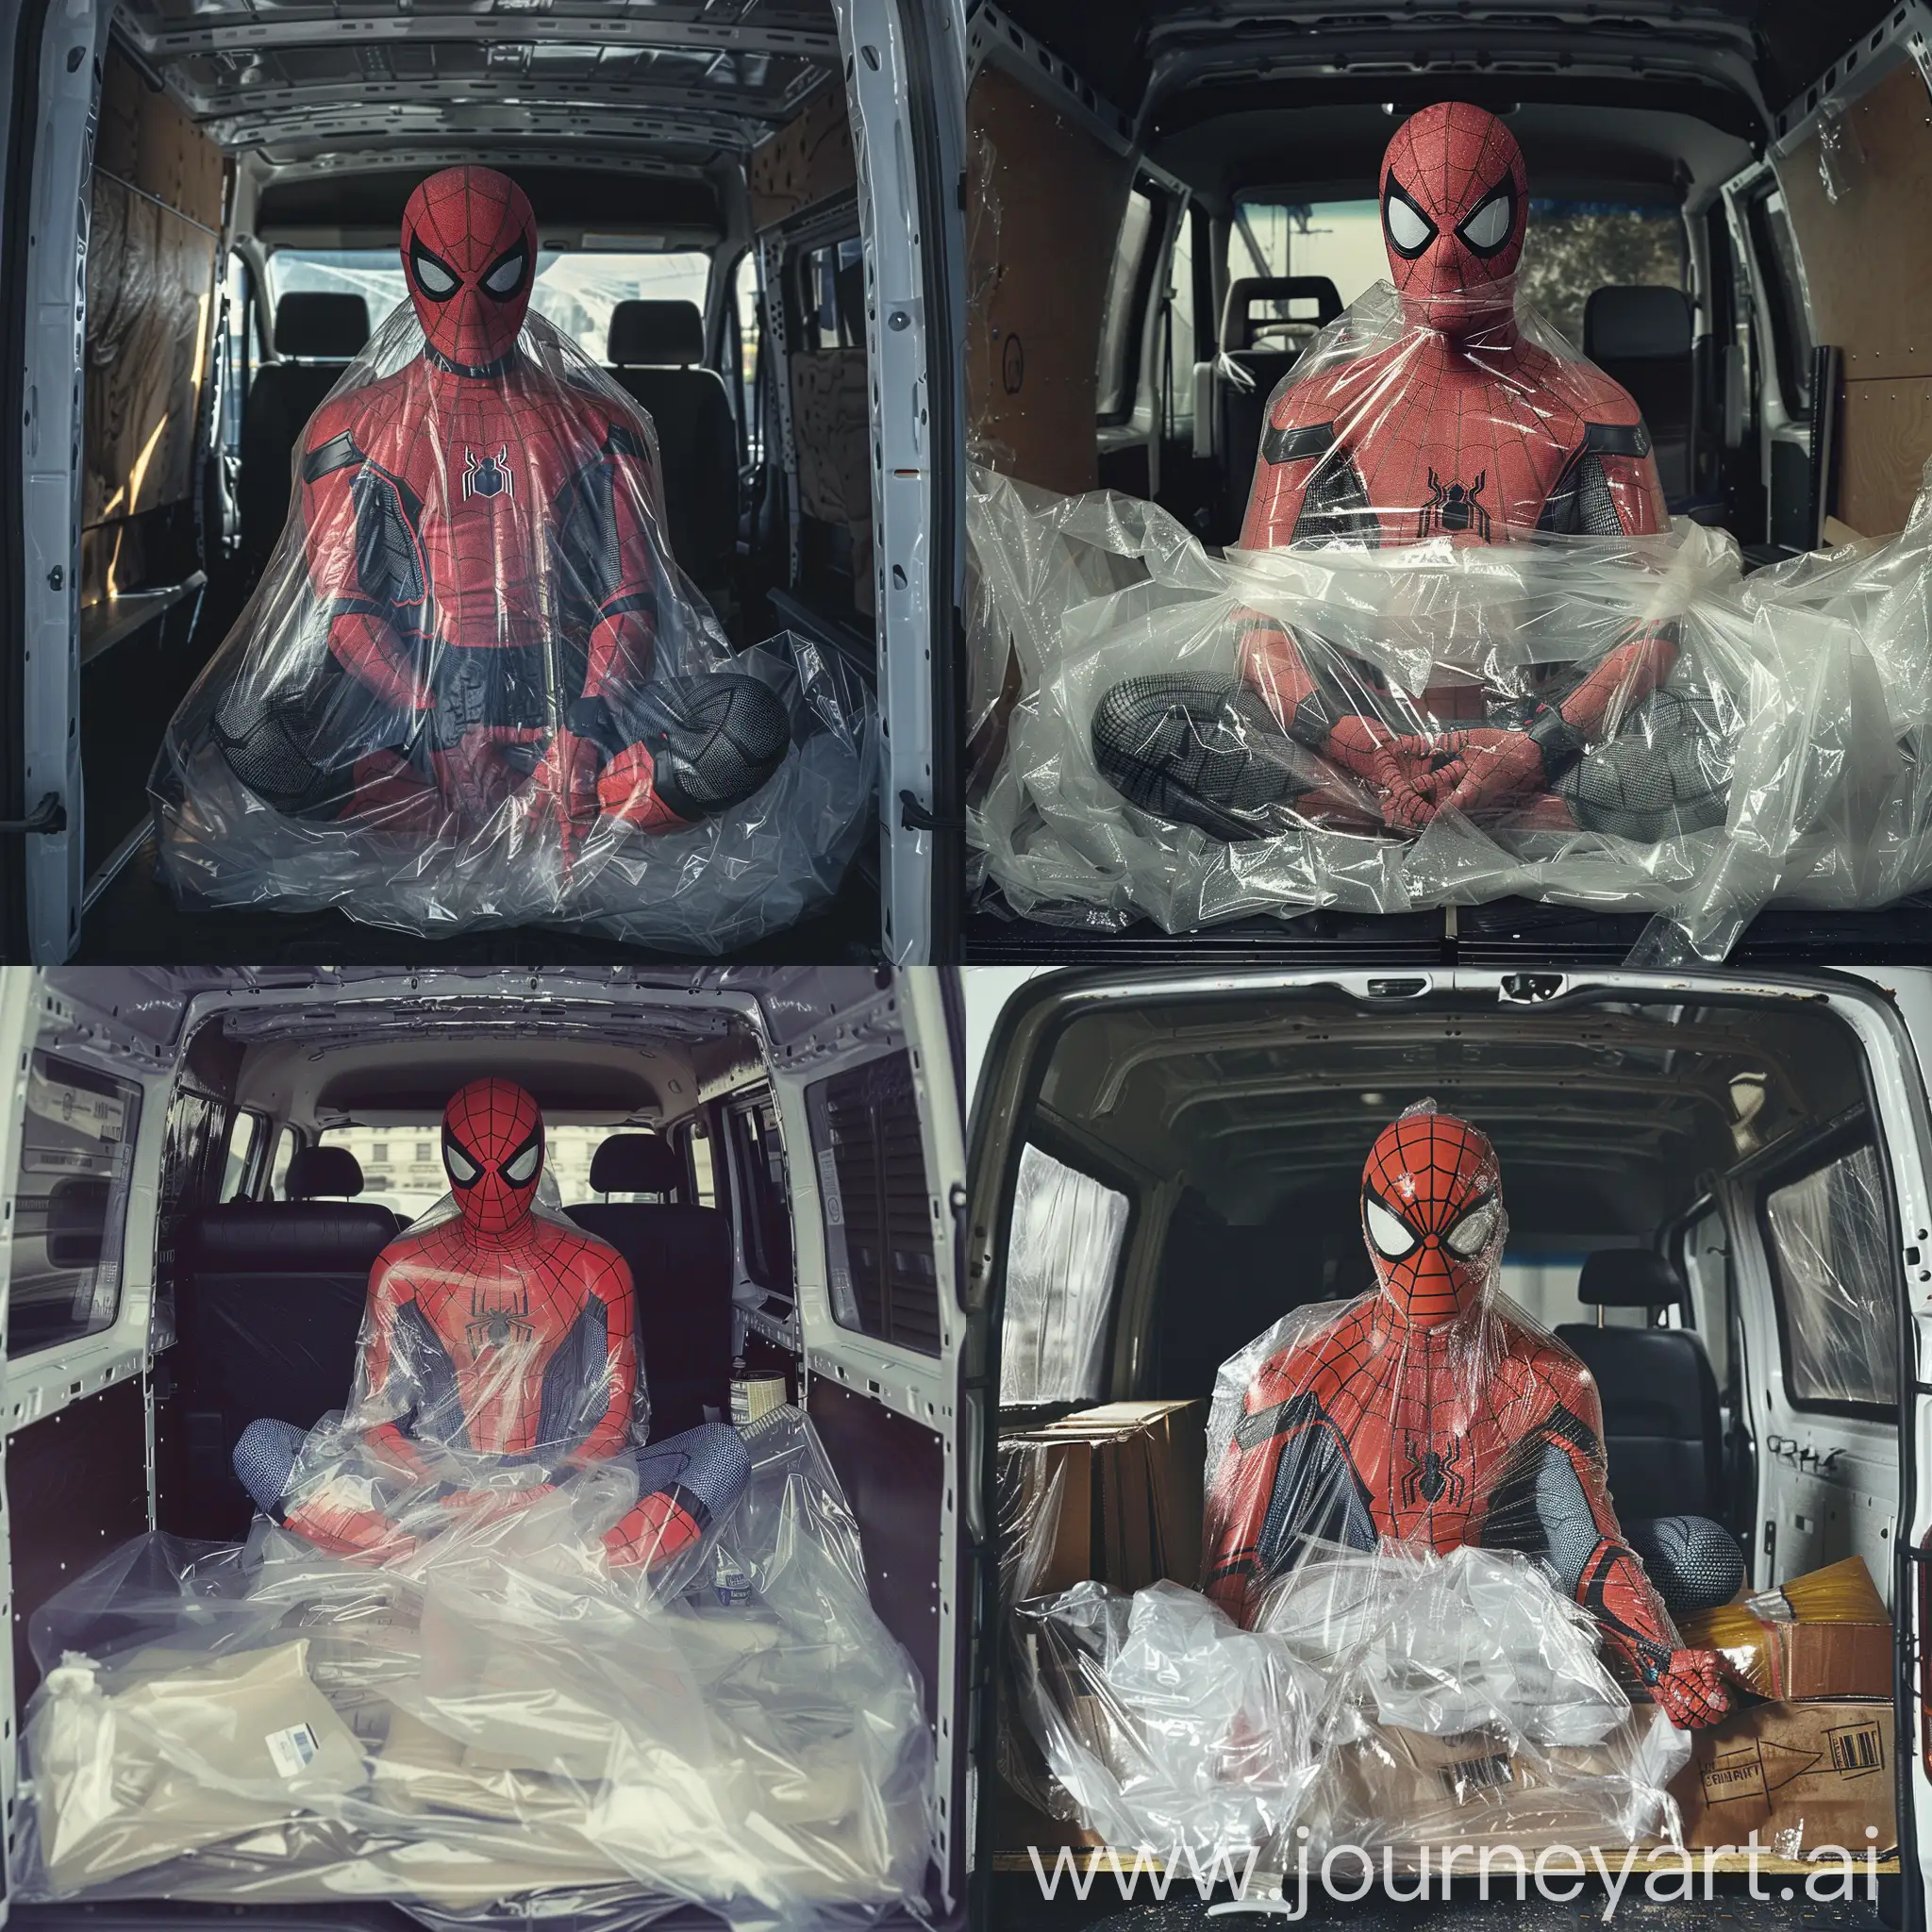 spiderman wrapped in plastic in the back of a van 